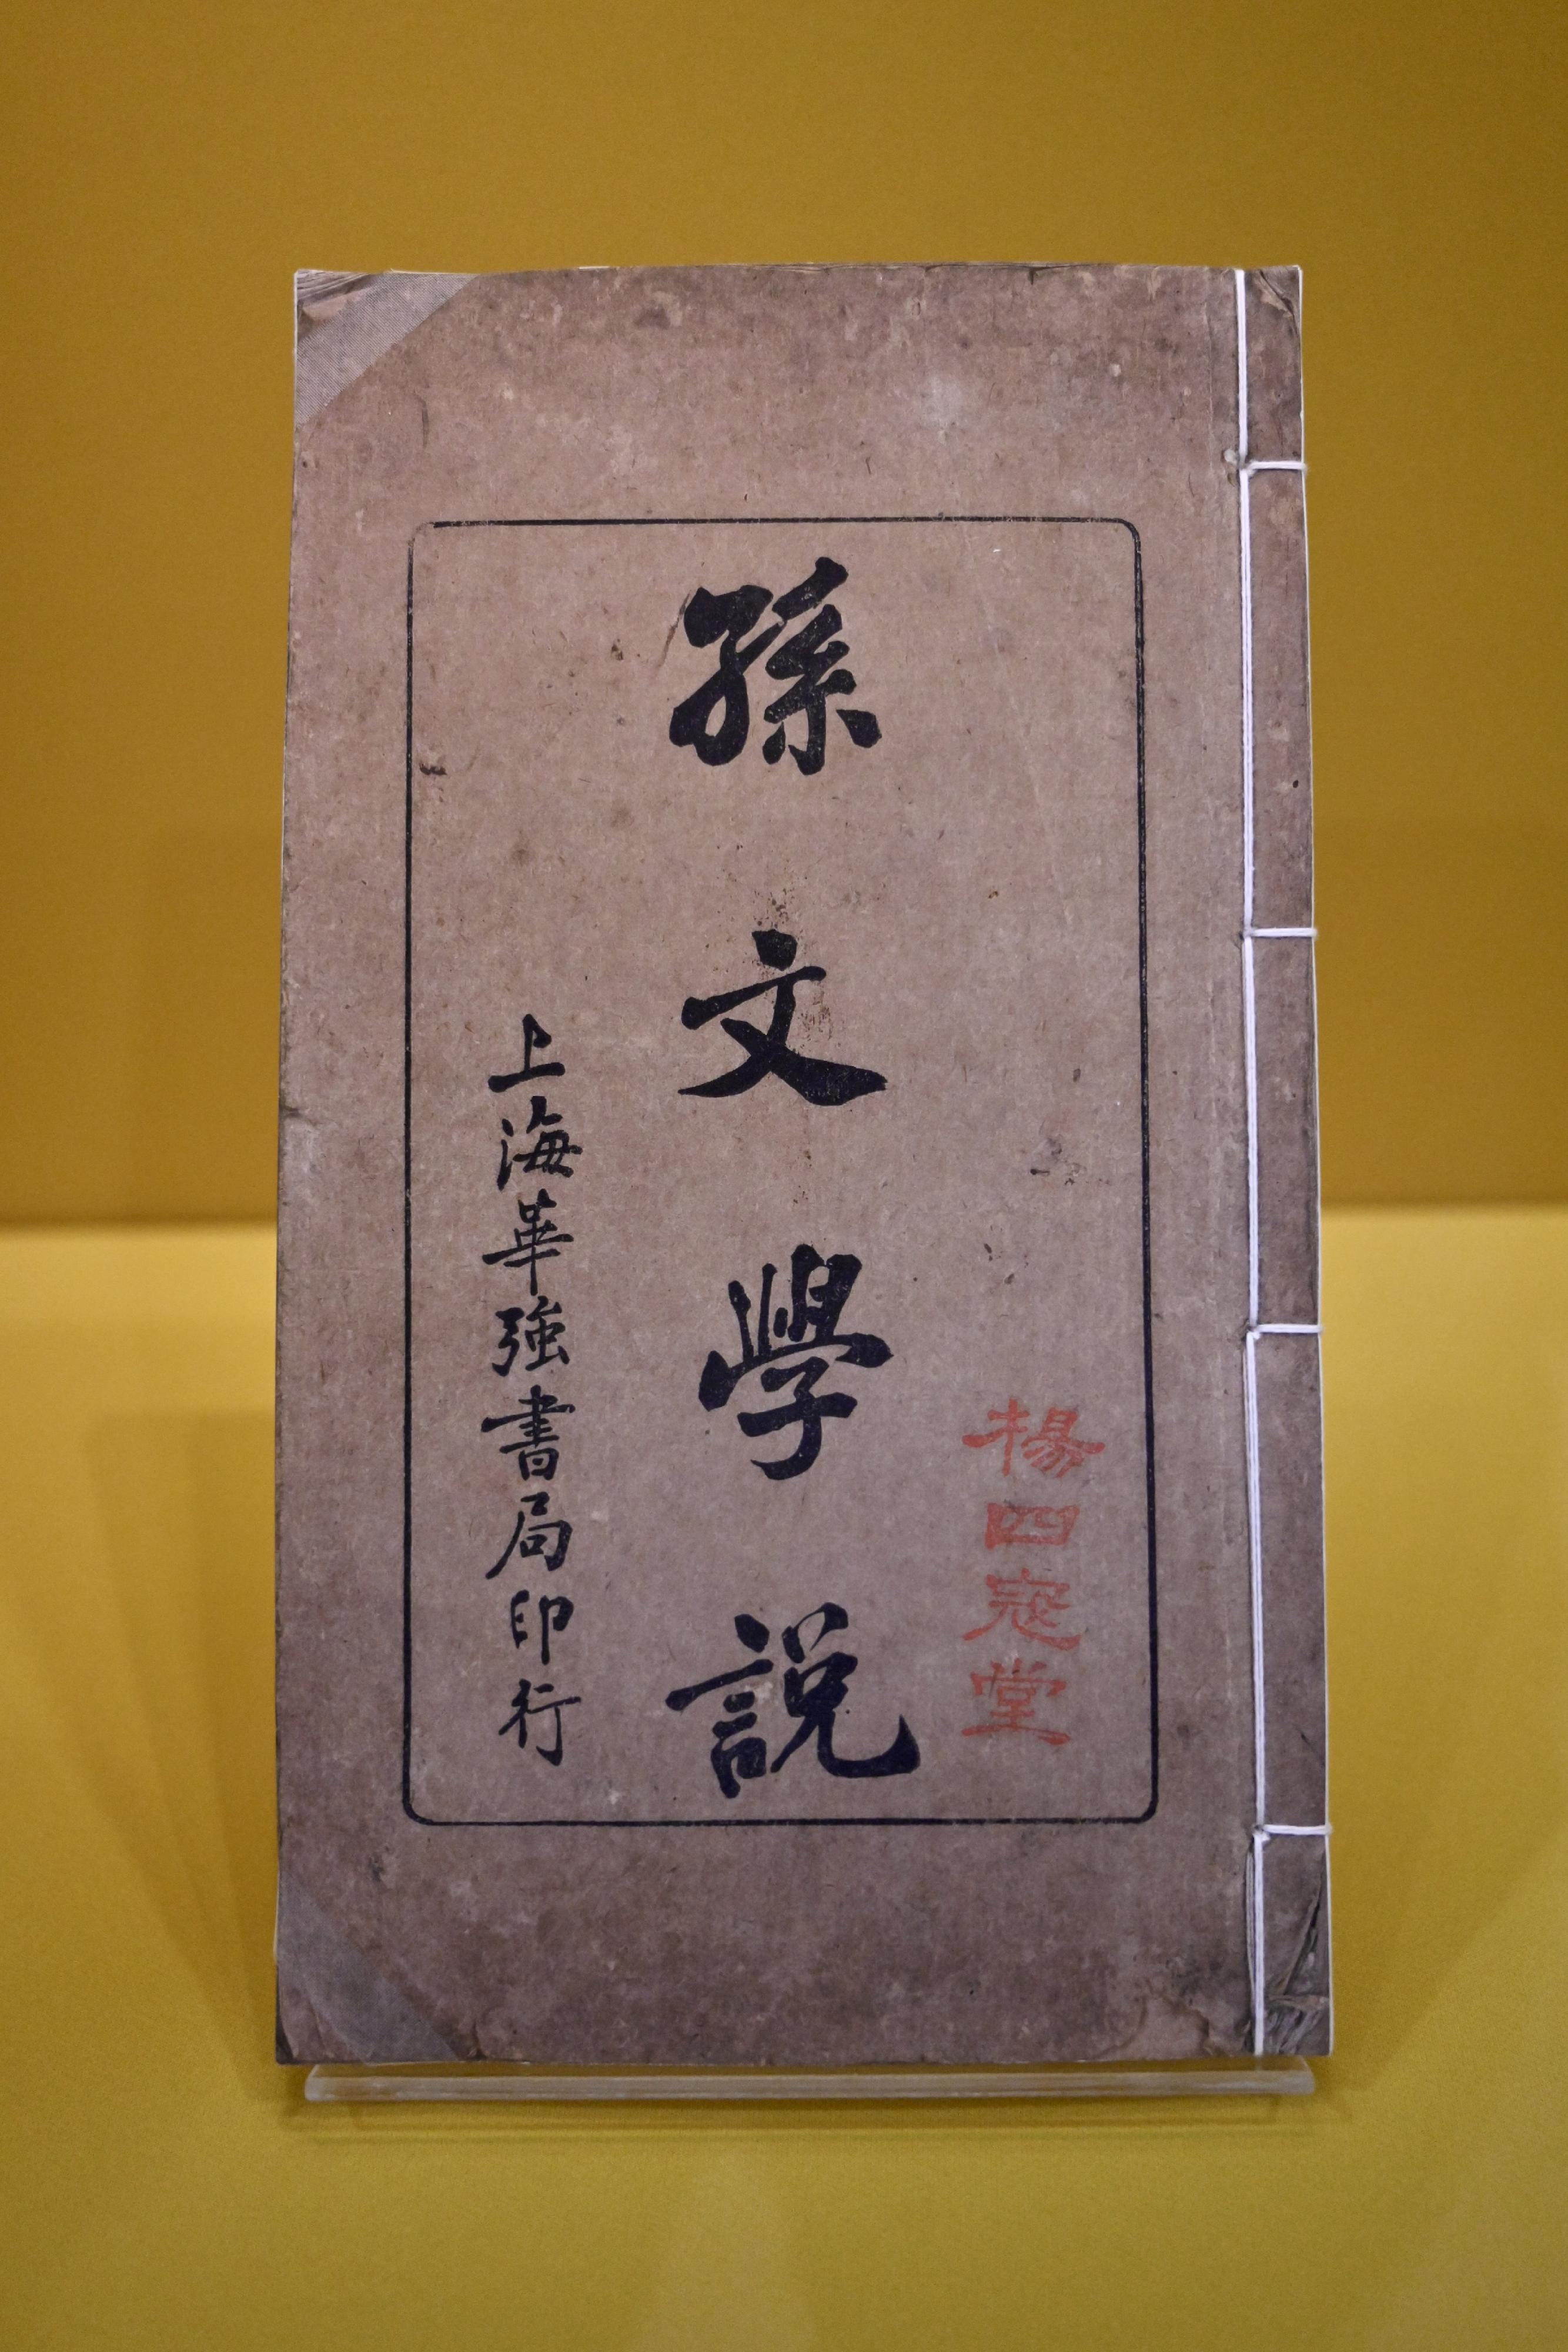 The Dr Sun Yat-sen Museum will hold the thematic exhibition "The Four Great Outlaws - Reshaping the Memories of the Revolution through a Photo" from tomorrow (December 10). Picture shows The Sun Wen Doctrines published in 1919, with the seal of Yang Si Kou Tang (the Four Great Outlaws Hall) impressed on the book cover (replica).